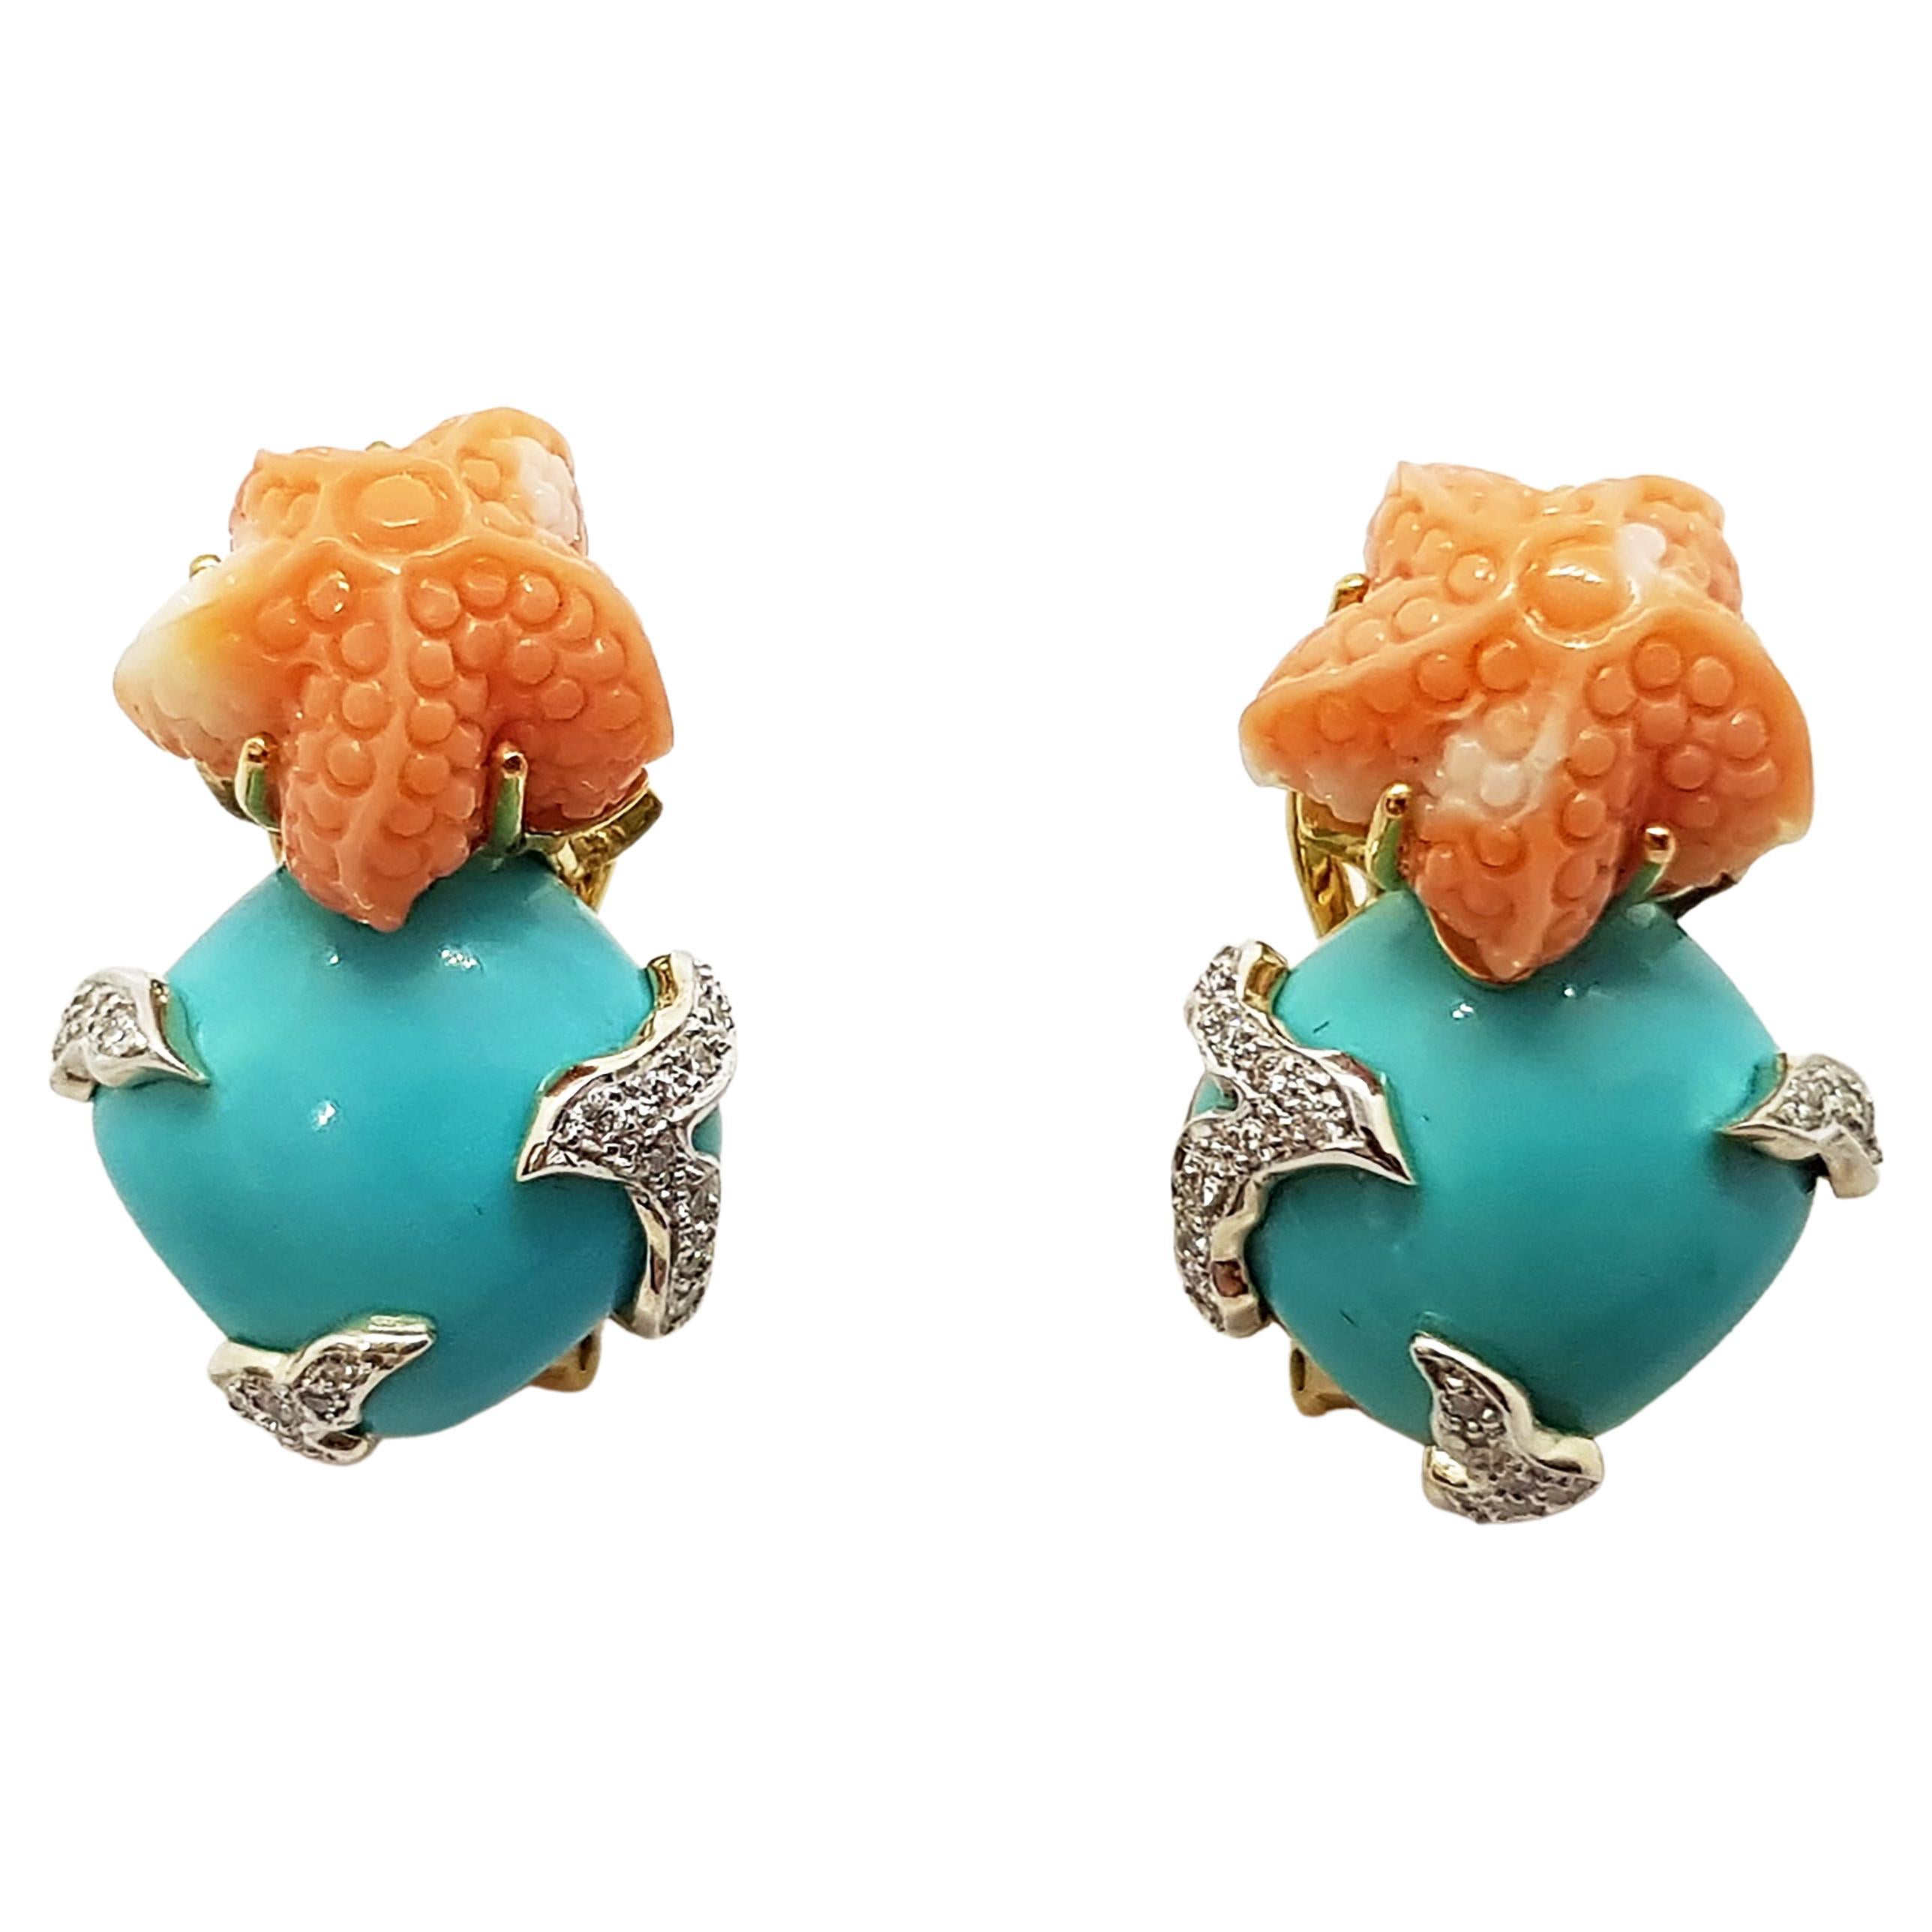 Turquoise, Carved Coral with Diamond Earrings in 18k Gold